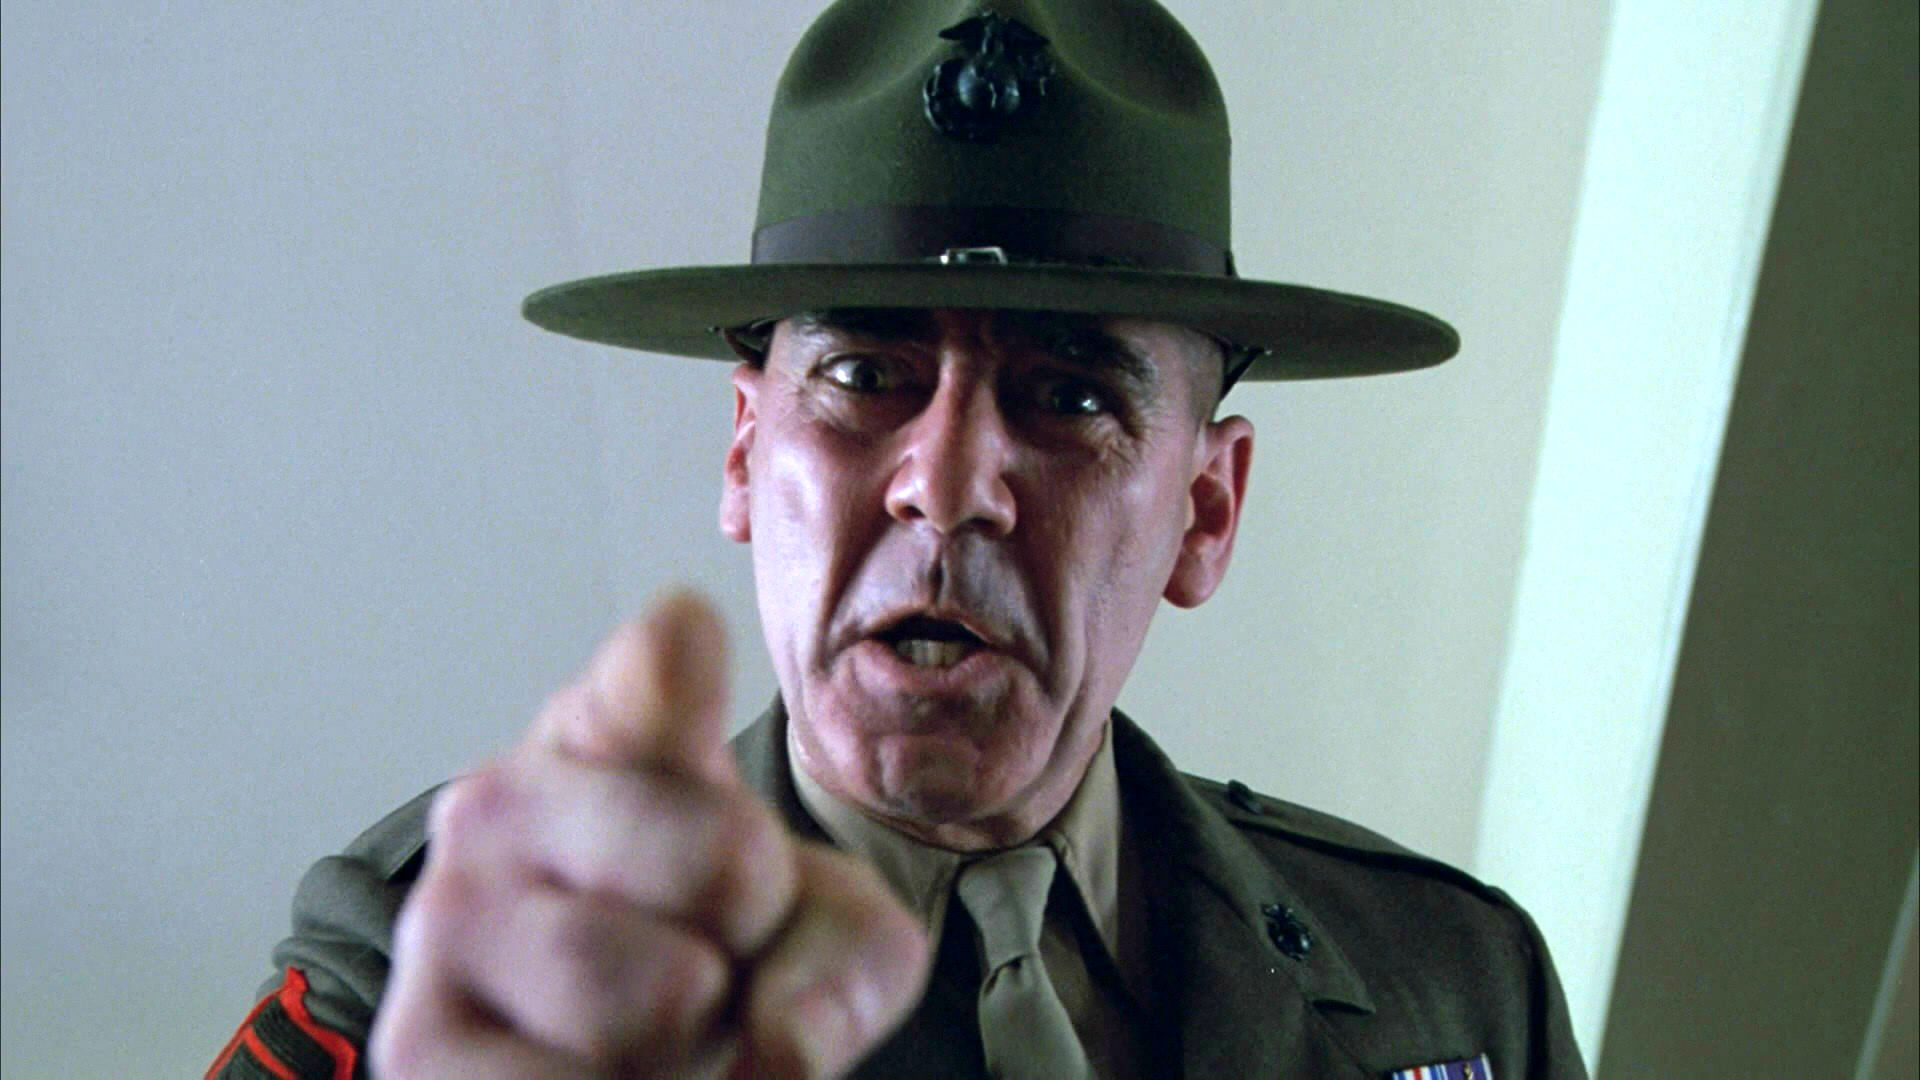 Full Metal Jacket Backgrounds, Compatible - PC, Mobile, Gadgets| 1920x1080 px